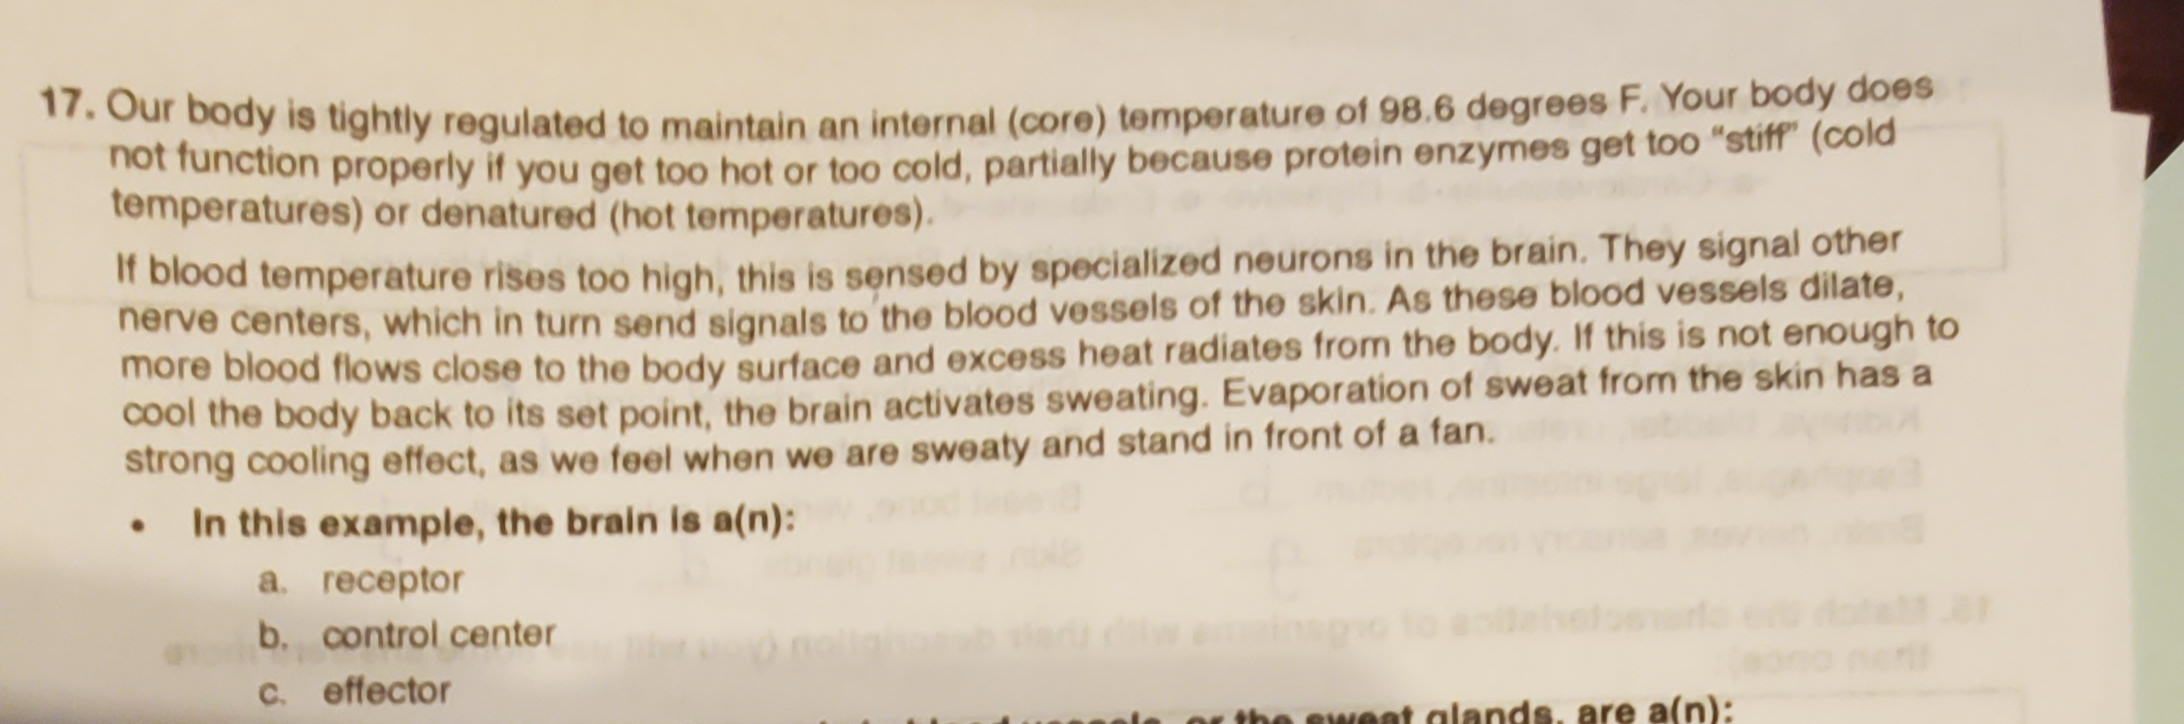 *our body is tightly regulated to maintain an internal (core) temperature of 98.6 degrees F. Your body does
not function properly if you get too hot or too cold, partially because protein enzymes get too "stiff" (cold
temperatures) or denatured (hot temperatures).
If blood temperature rises too high, this is sensed by specialized neurons in the brain. They signal other
herve centers, which in turn send signals toʻthe blood vessels of the skin. As these blood vessels dilate,
more blood flows close to the body surface and excess heat radiates from the body. If this is not enough to
cool the body back to its set point, the brain activates sweating. Evaporation of sweat from the skin has a
strong cooling effect, as we feel when we are sweaty and stand in front of a fan.
In this example, the brain is a(n):
а. гесеptor
b. control center
nent
C. effector
eweet alands, are a(n):
